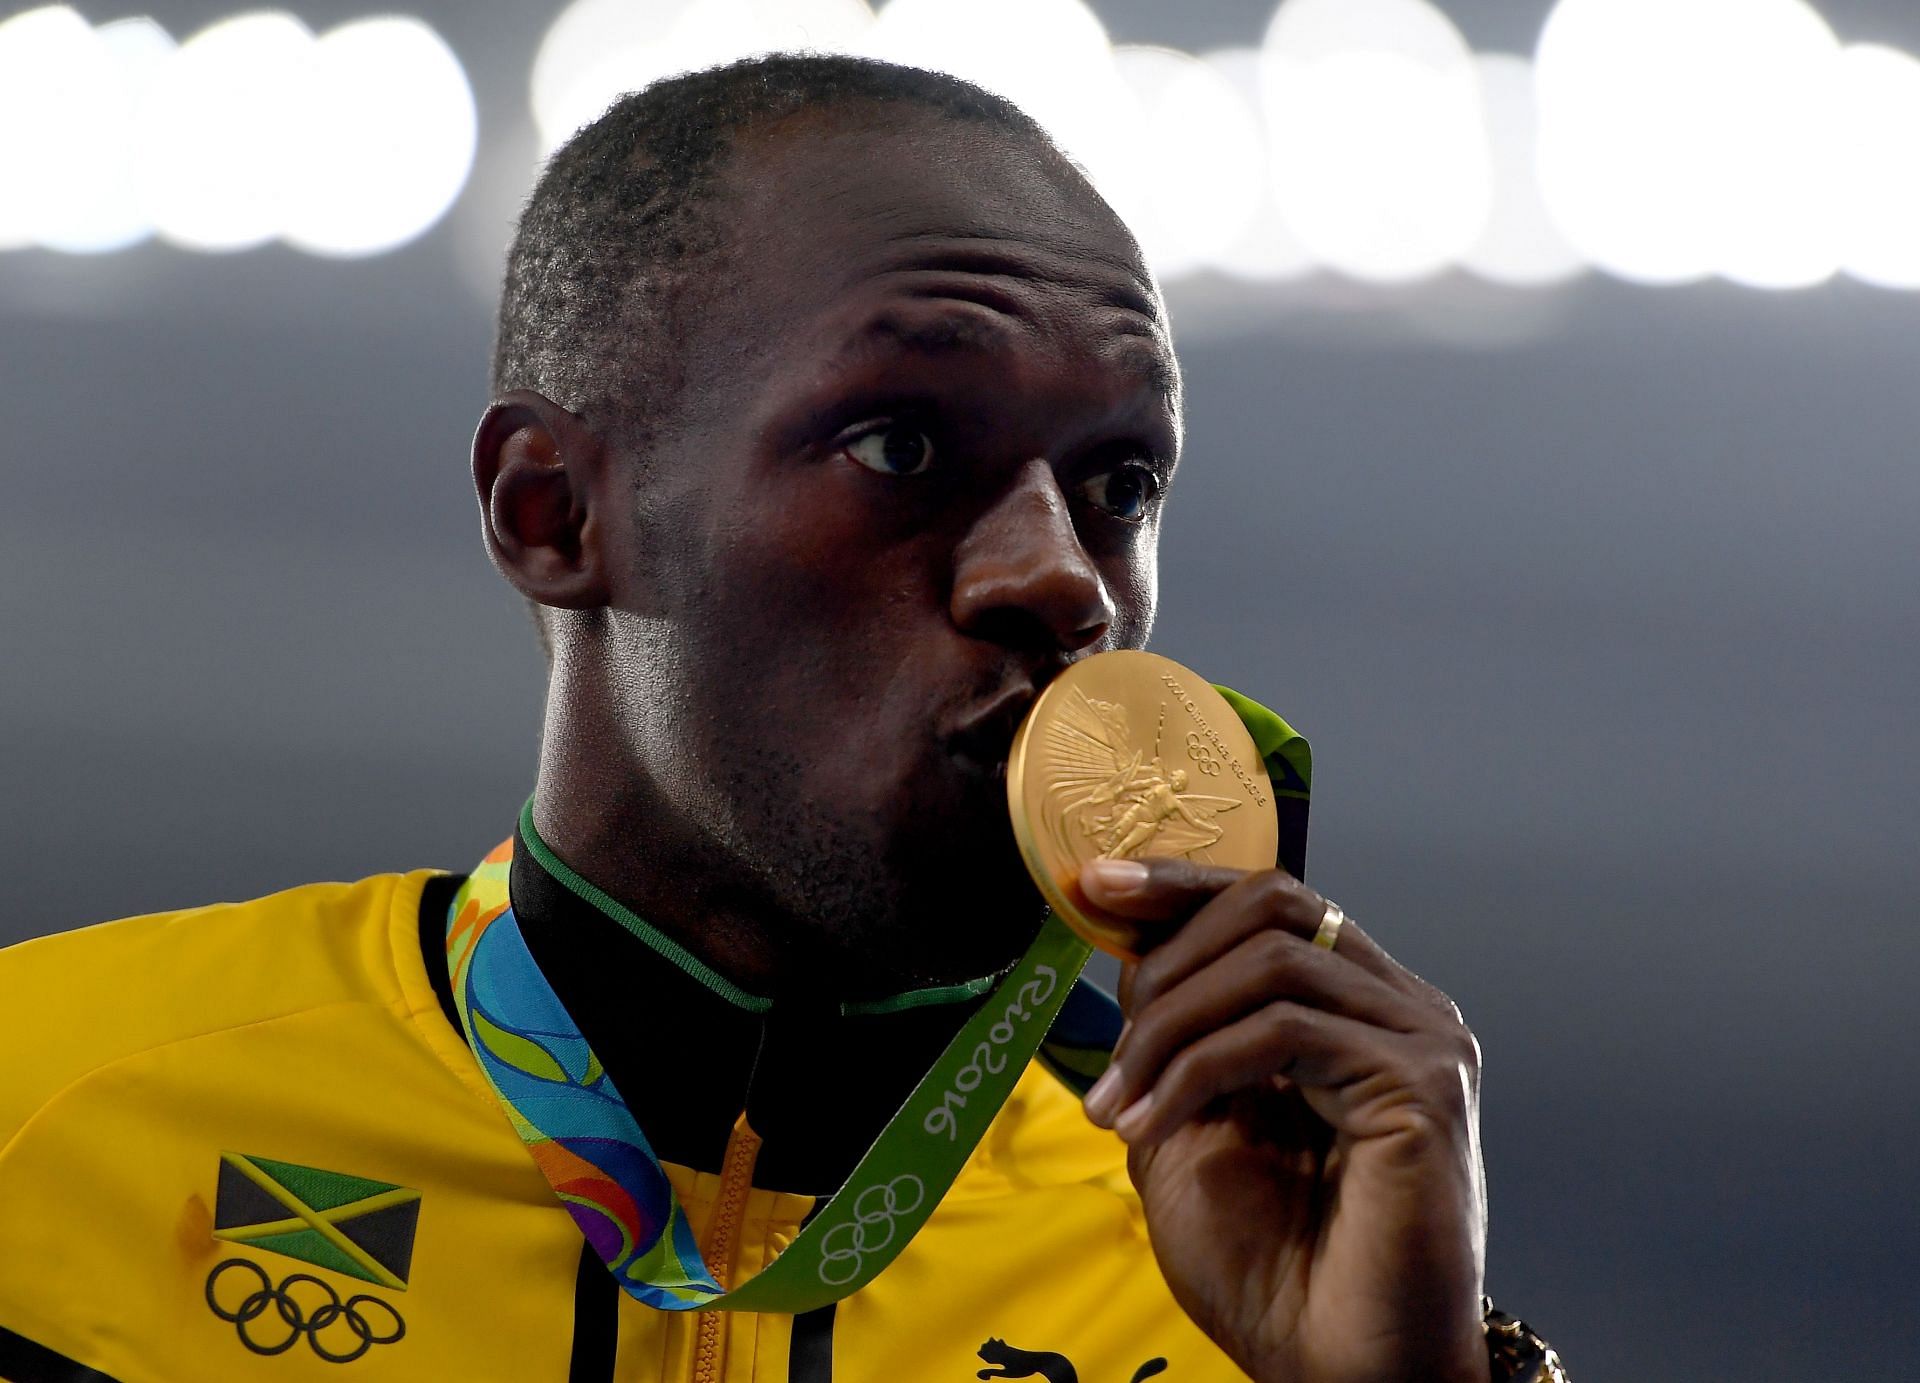 Usain Bolt poses on the podium during the medal ceremony after winning a gold medal in men&#039;s 200m at the 2016 Rio Olympics in Rio de Janeiro Brazil